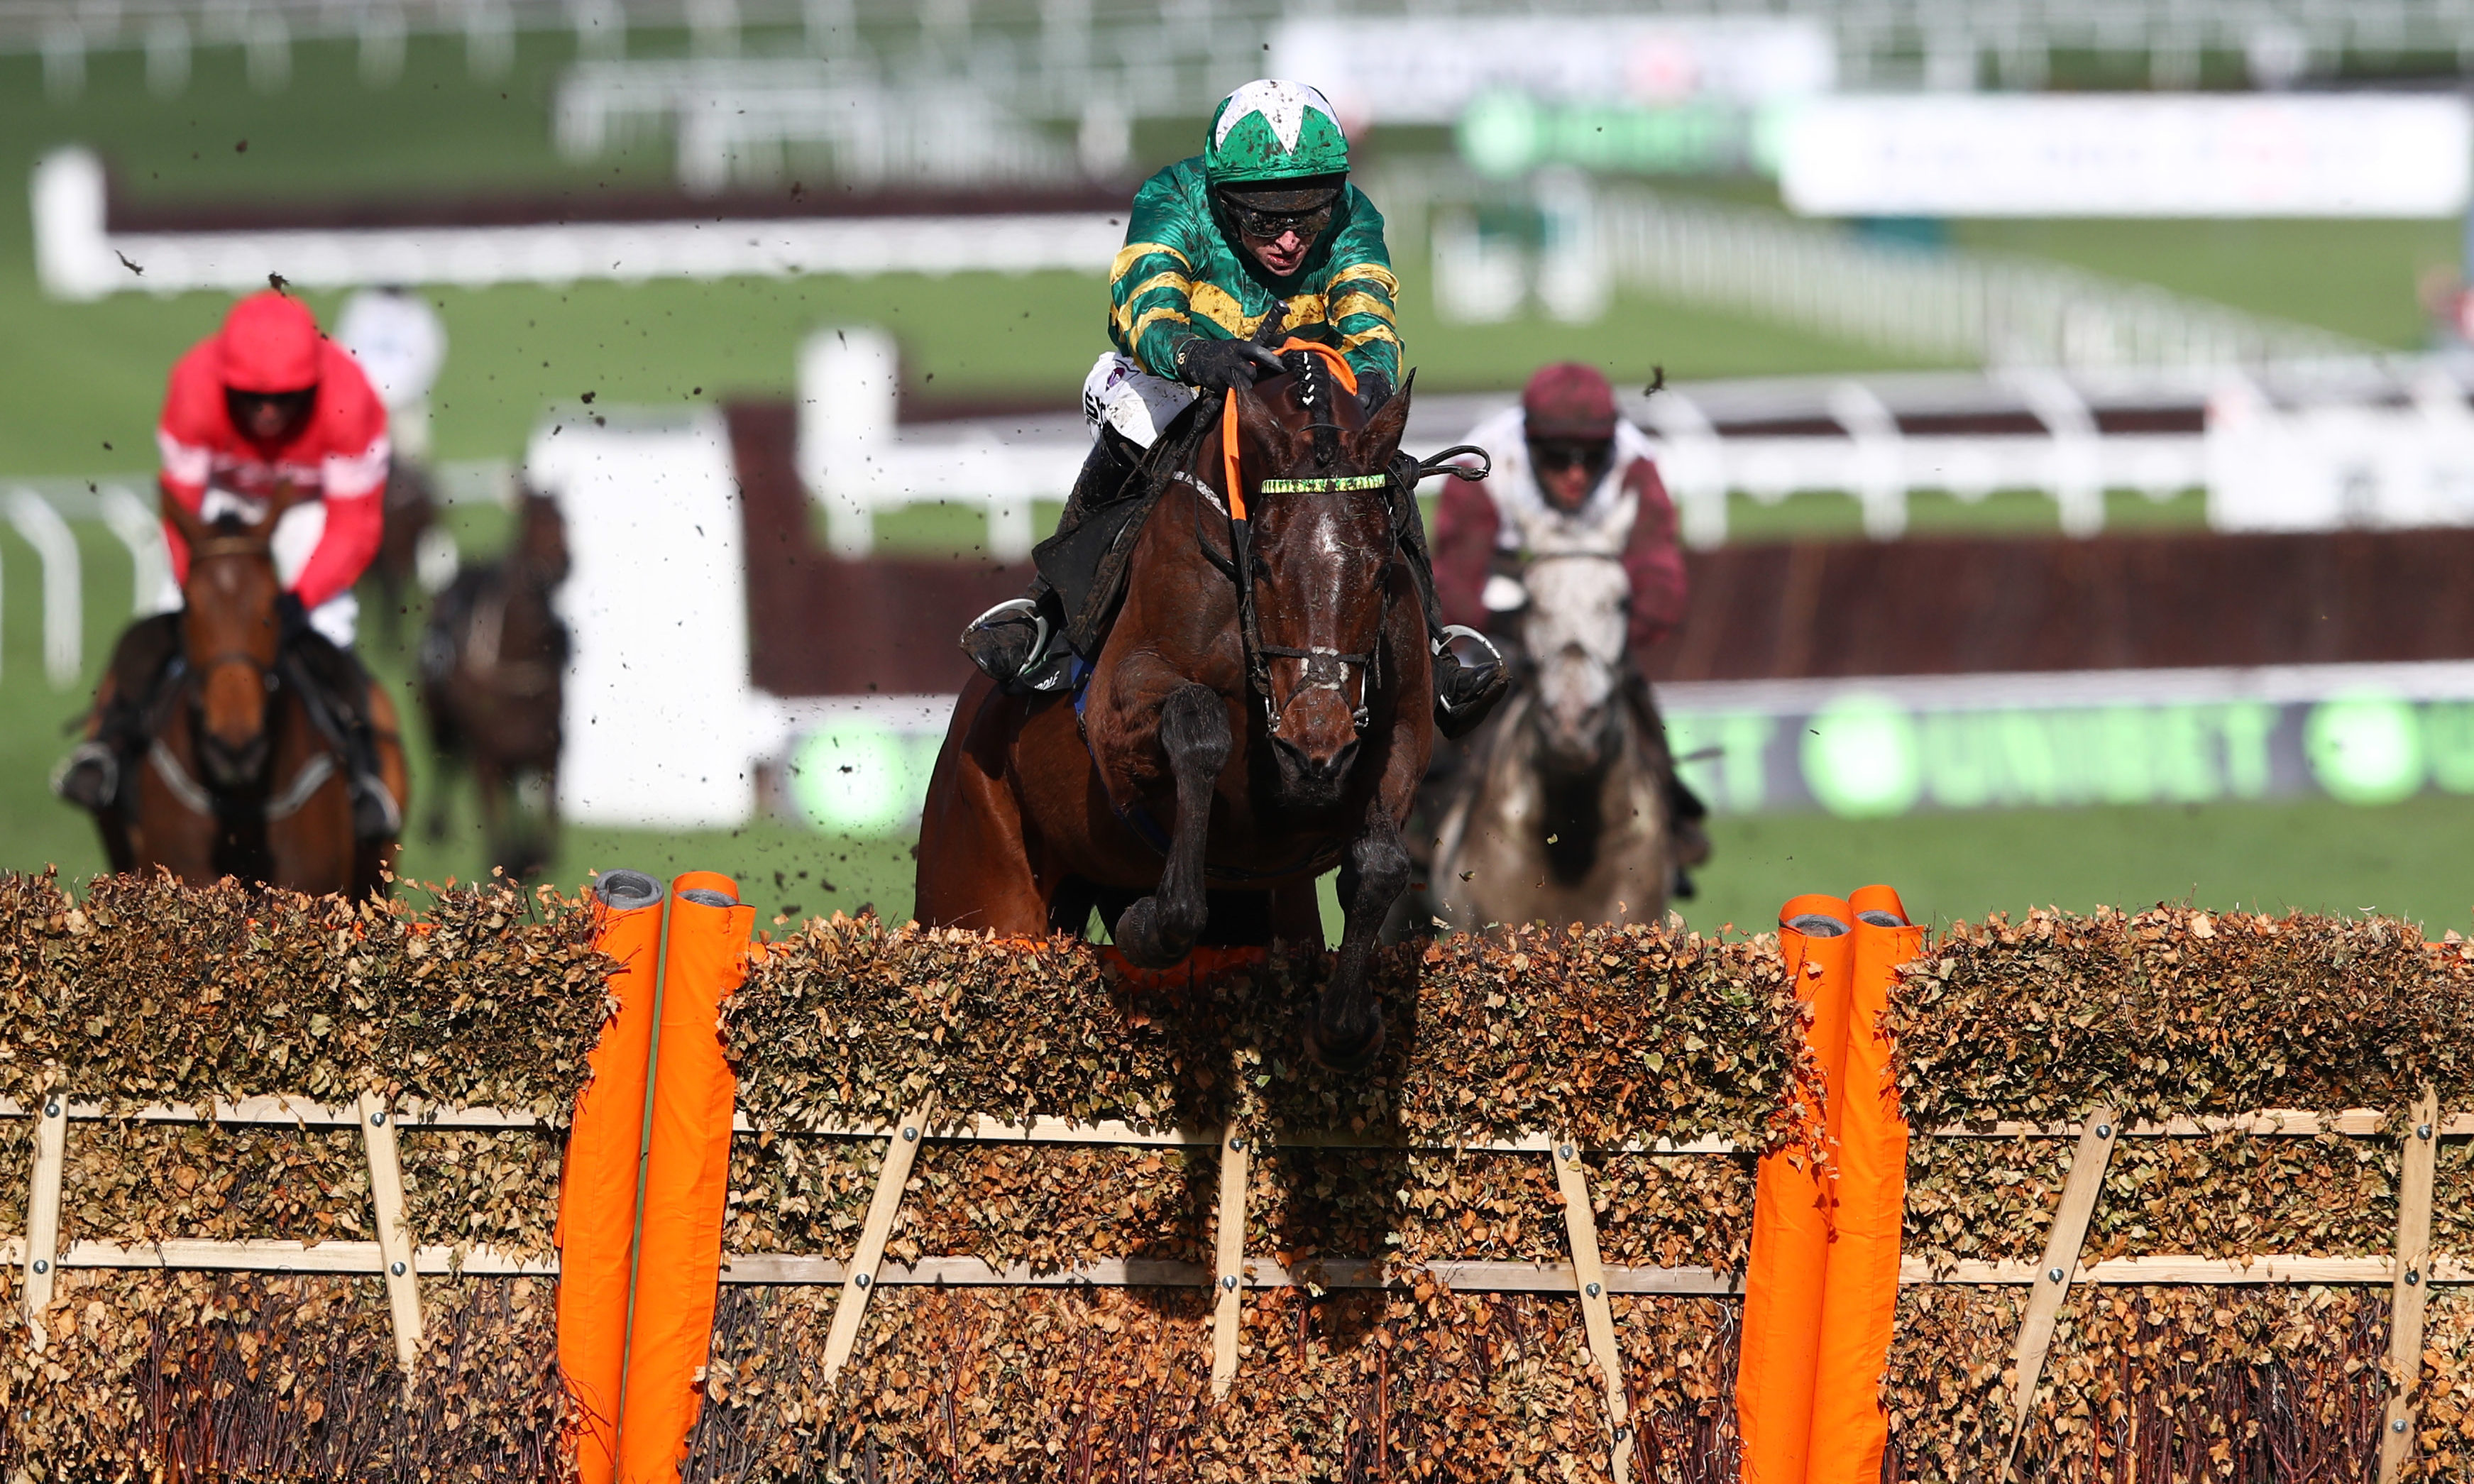 Espoir D'Allen ridden by Mark Walsh clears the final fence during the Unibet Champion Hurdle Challenge Trophy. Michael Steele/Getty Images